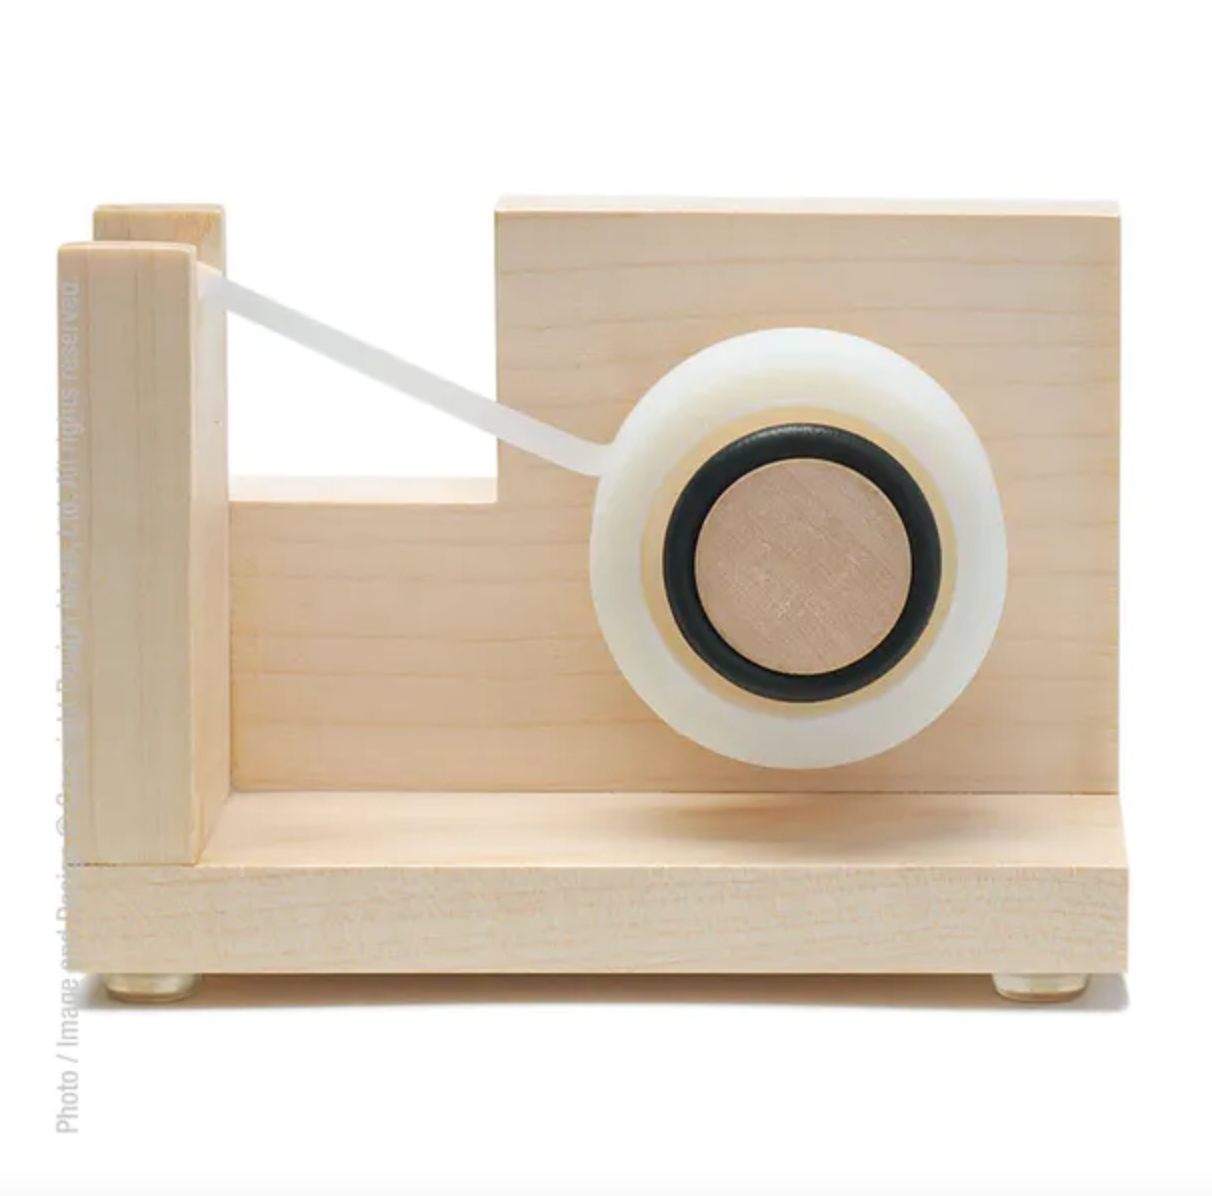 Stationery nerds will love this wooden washi tape dispenser - The